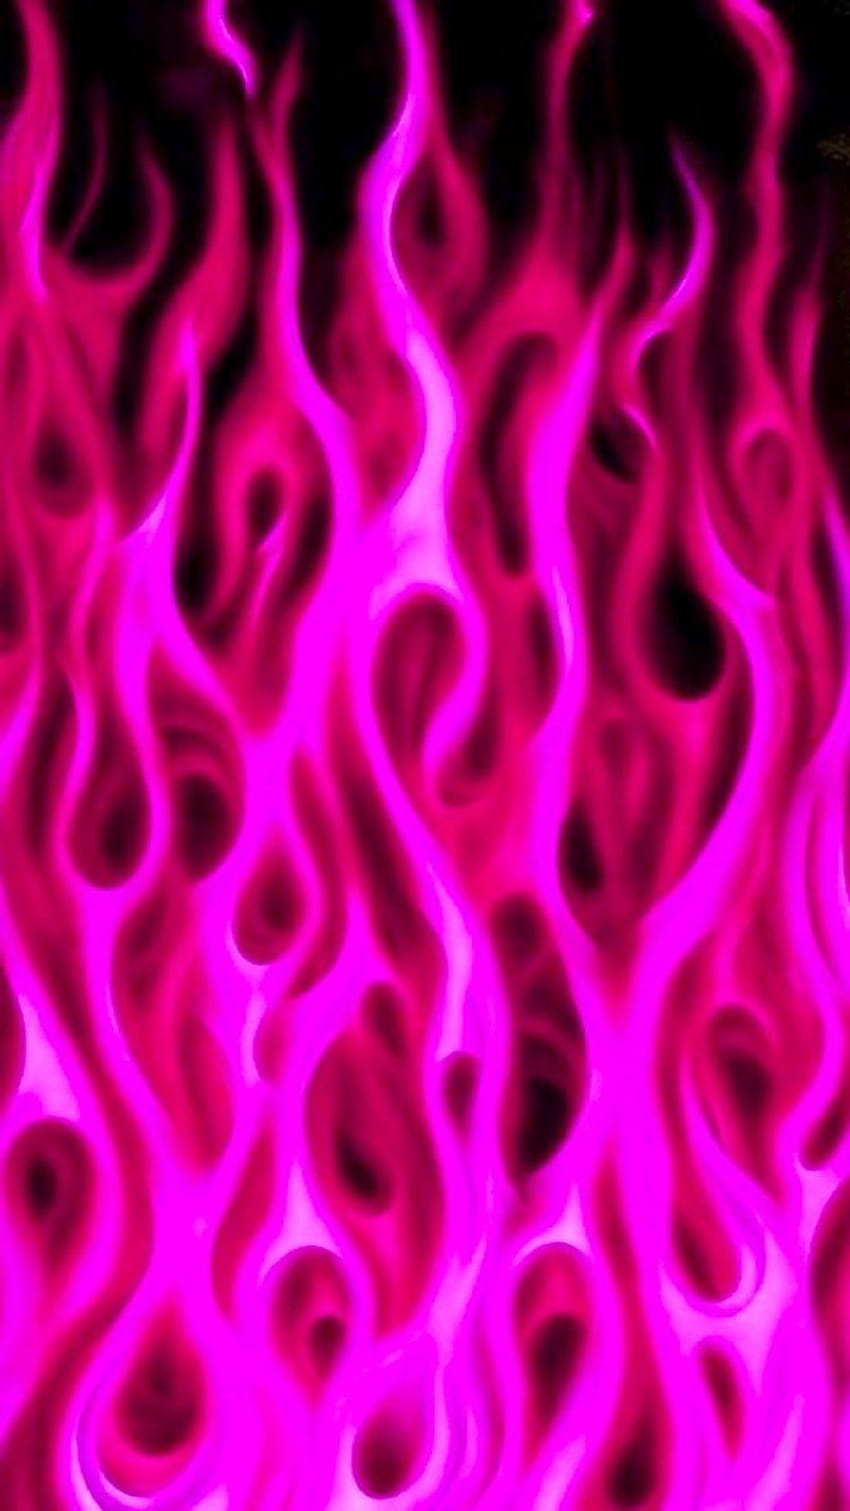 A close up of a pink and black fire background - Hot pink